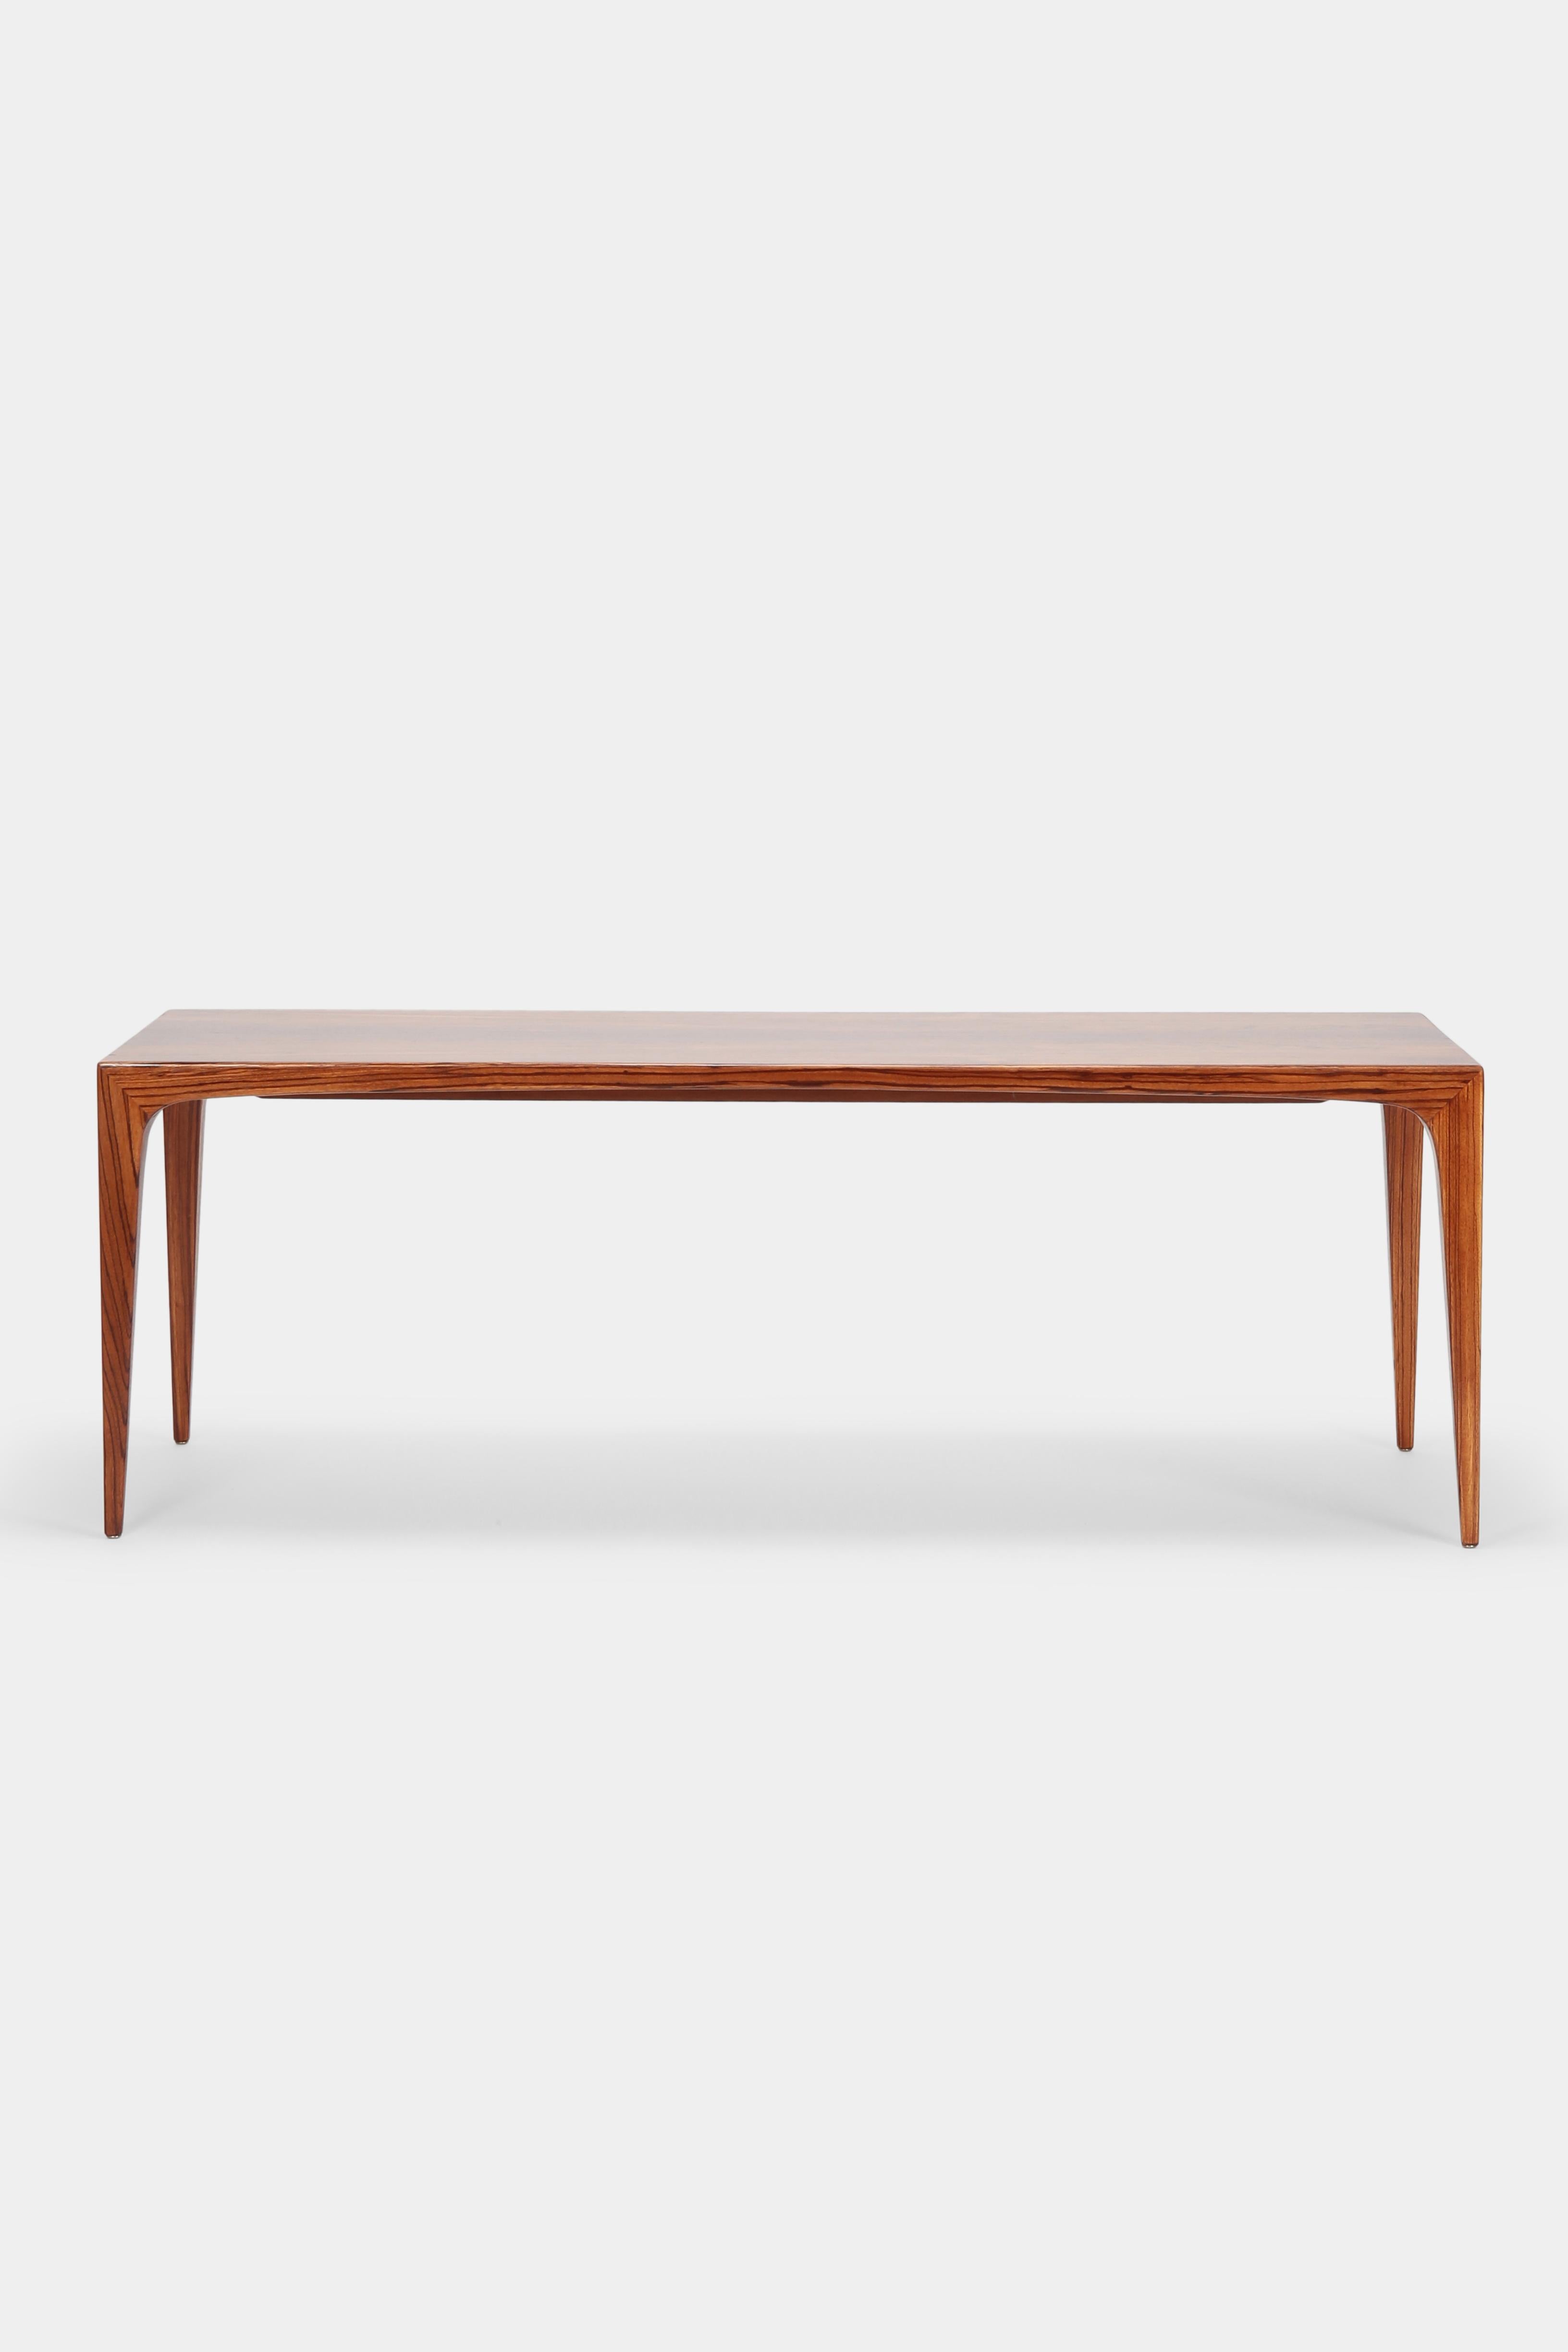 Erling Torvits Coffee Table Heltborg Møbler, 1960s In Good Condition For Sale In Basel, CH